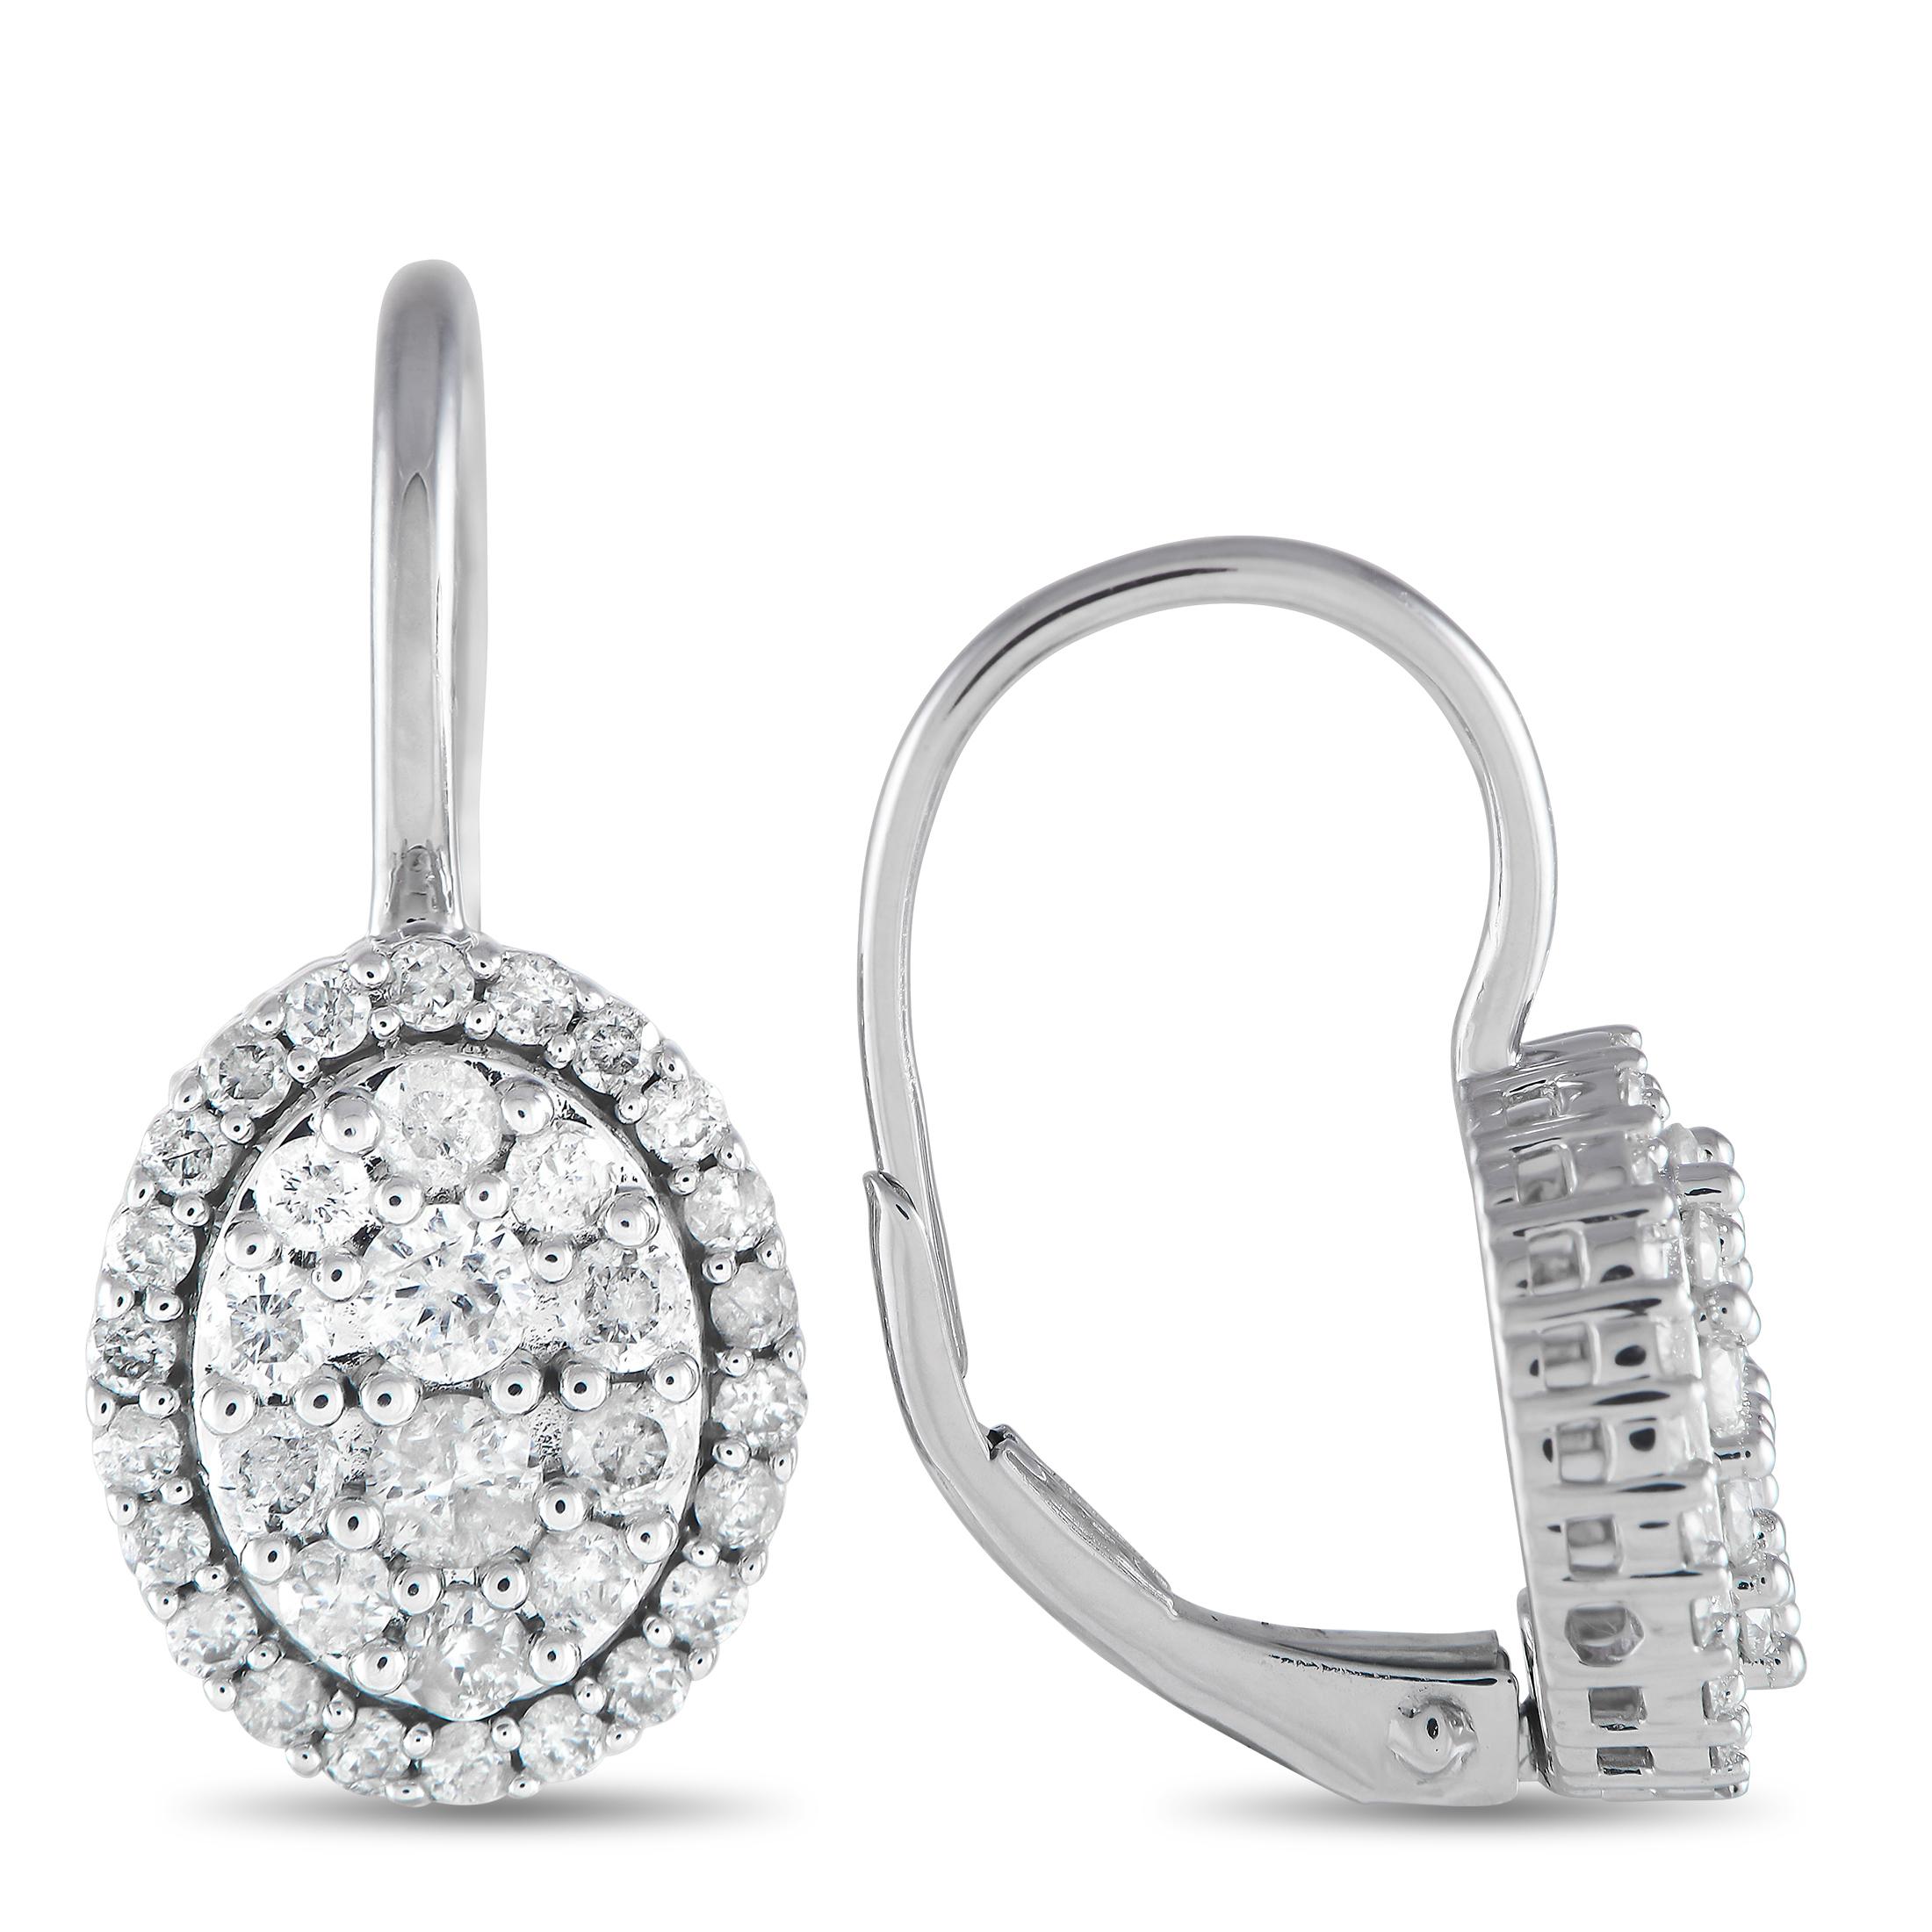 The earrings you'll now reach for when dressing up on special days. These sparklers feature an oval cluster of round diamonds secured by a leverback hook. A halo of diamonds adds to the gracefulness of these earrings. Each earring measures 0.75